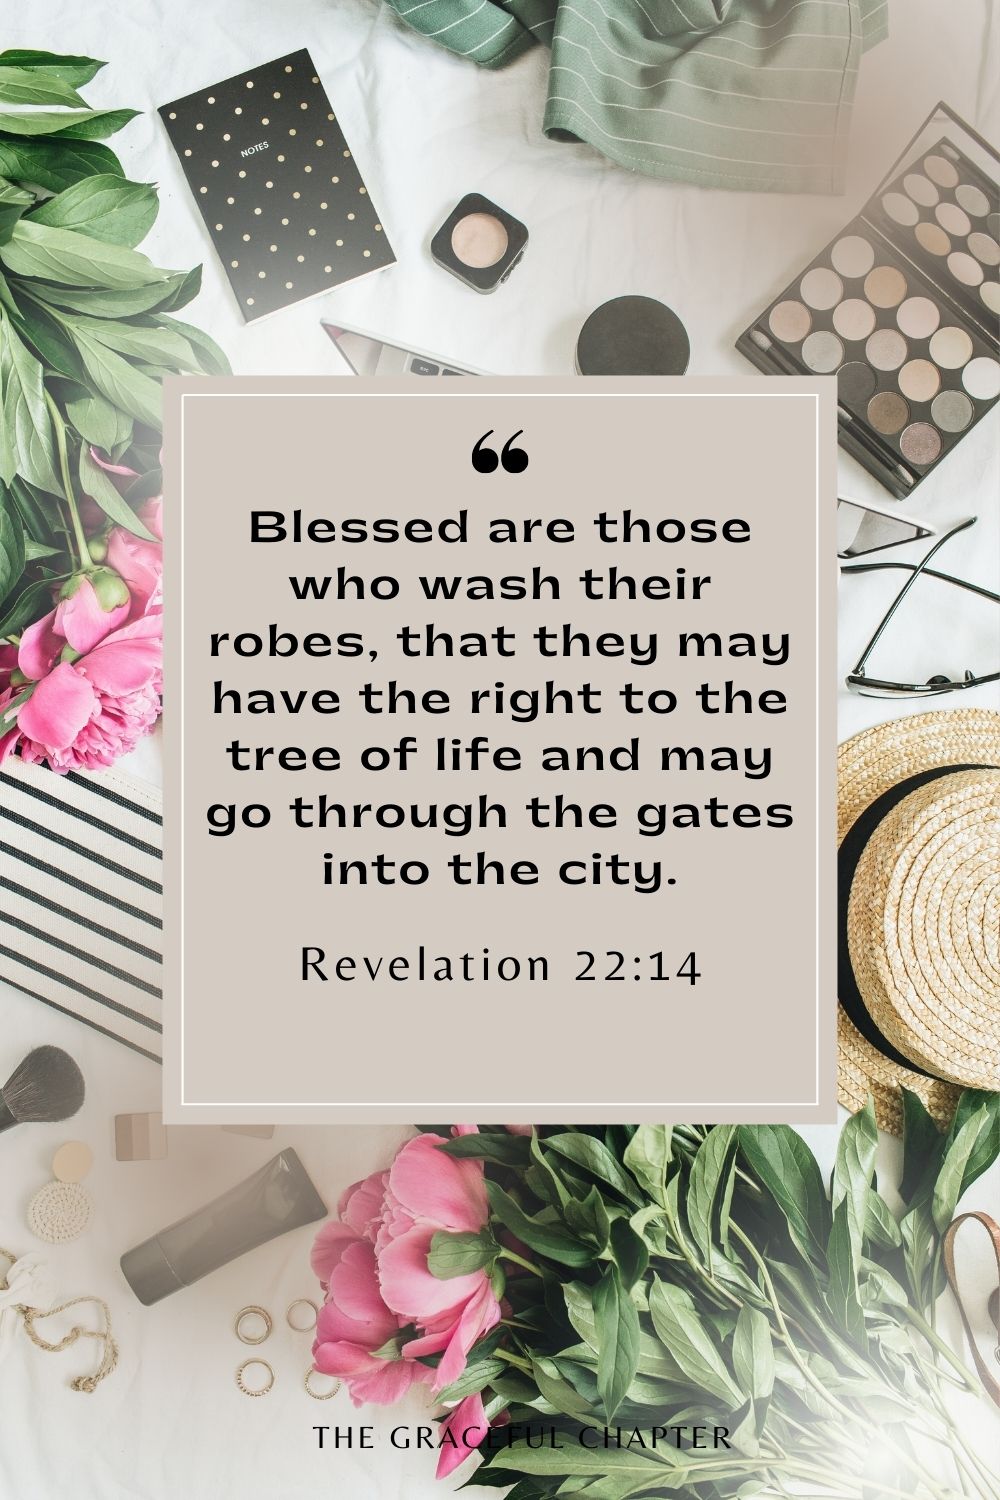 Blessed are those who wash their robes, that they may have the right to the tree of life and may go through the gates into the city. Revelation 22:14